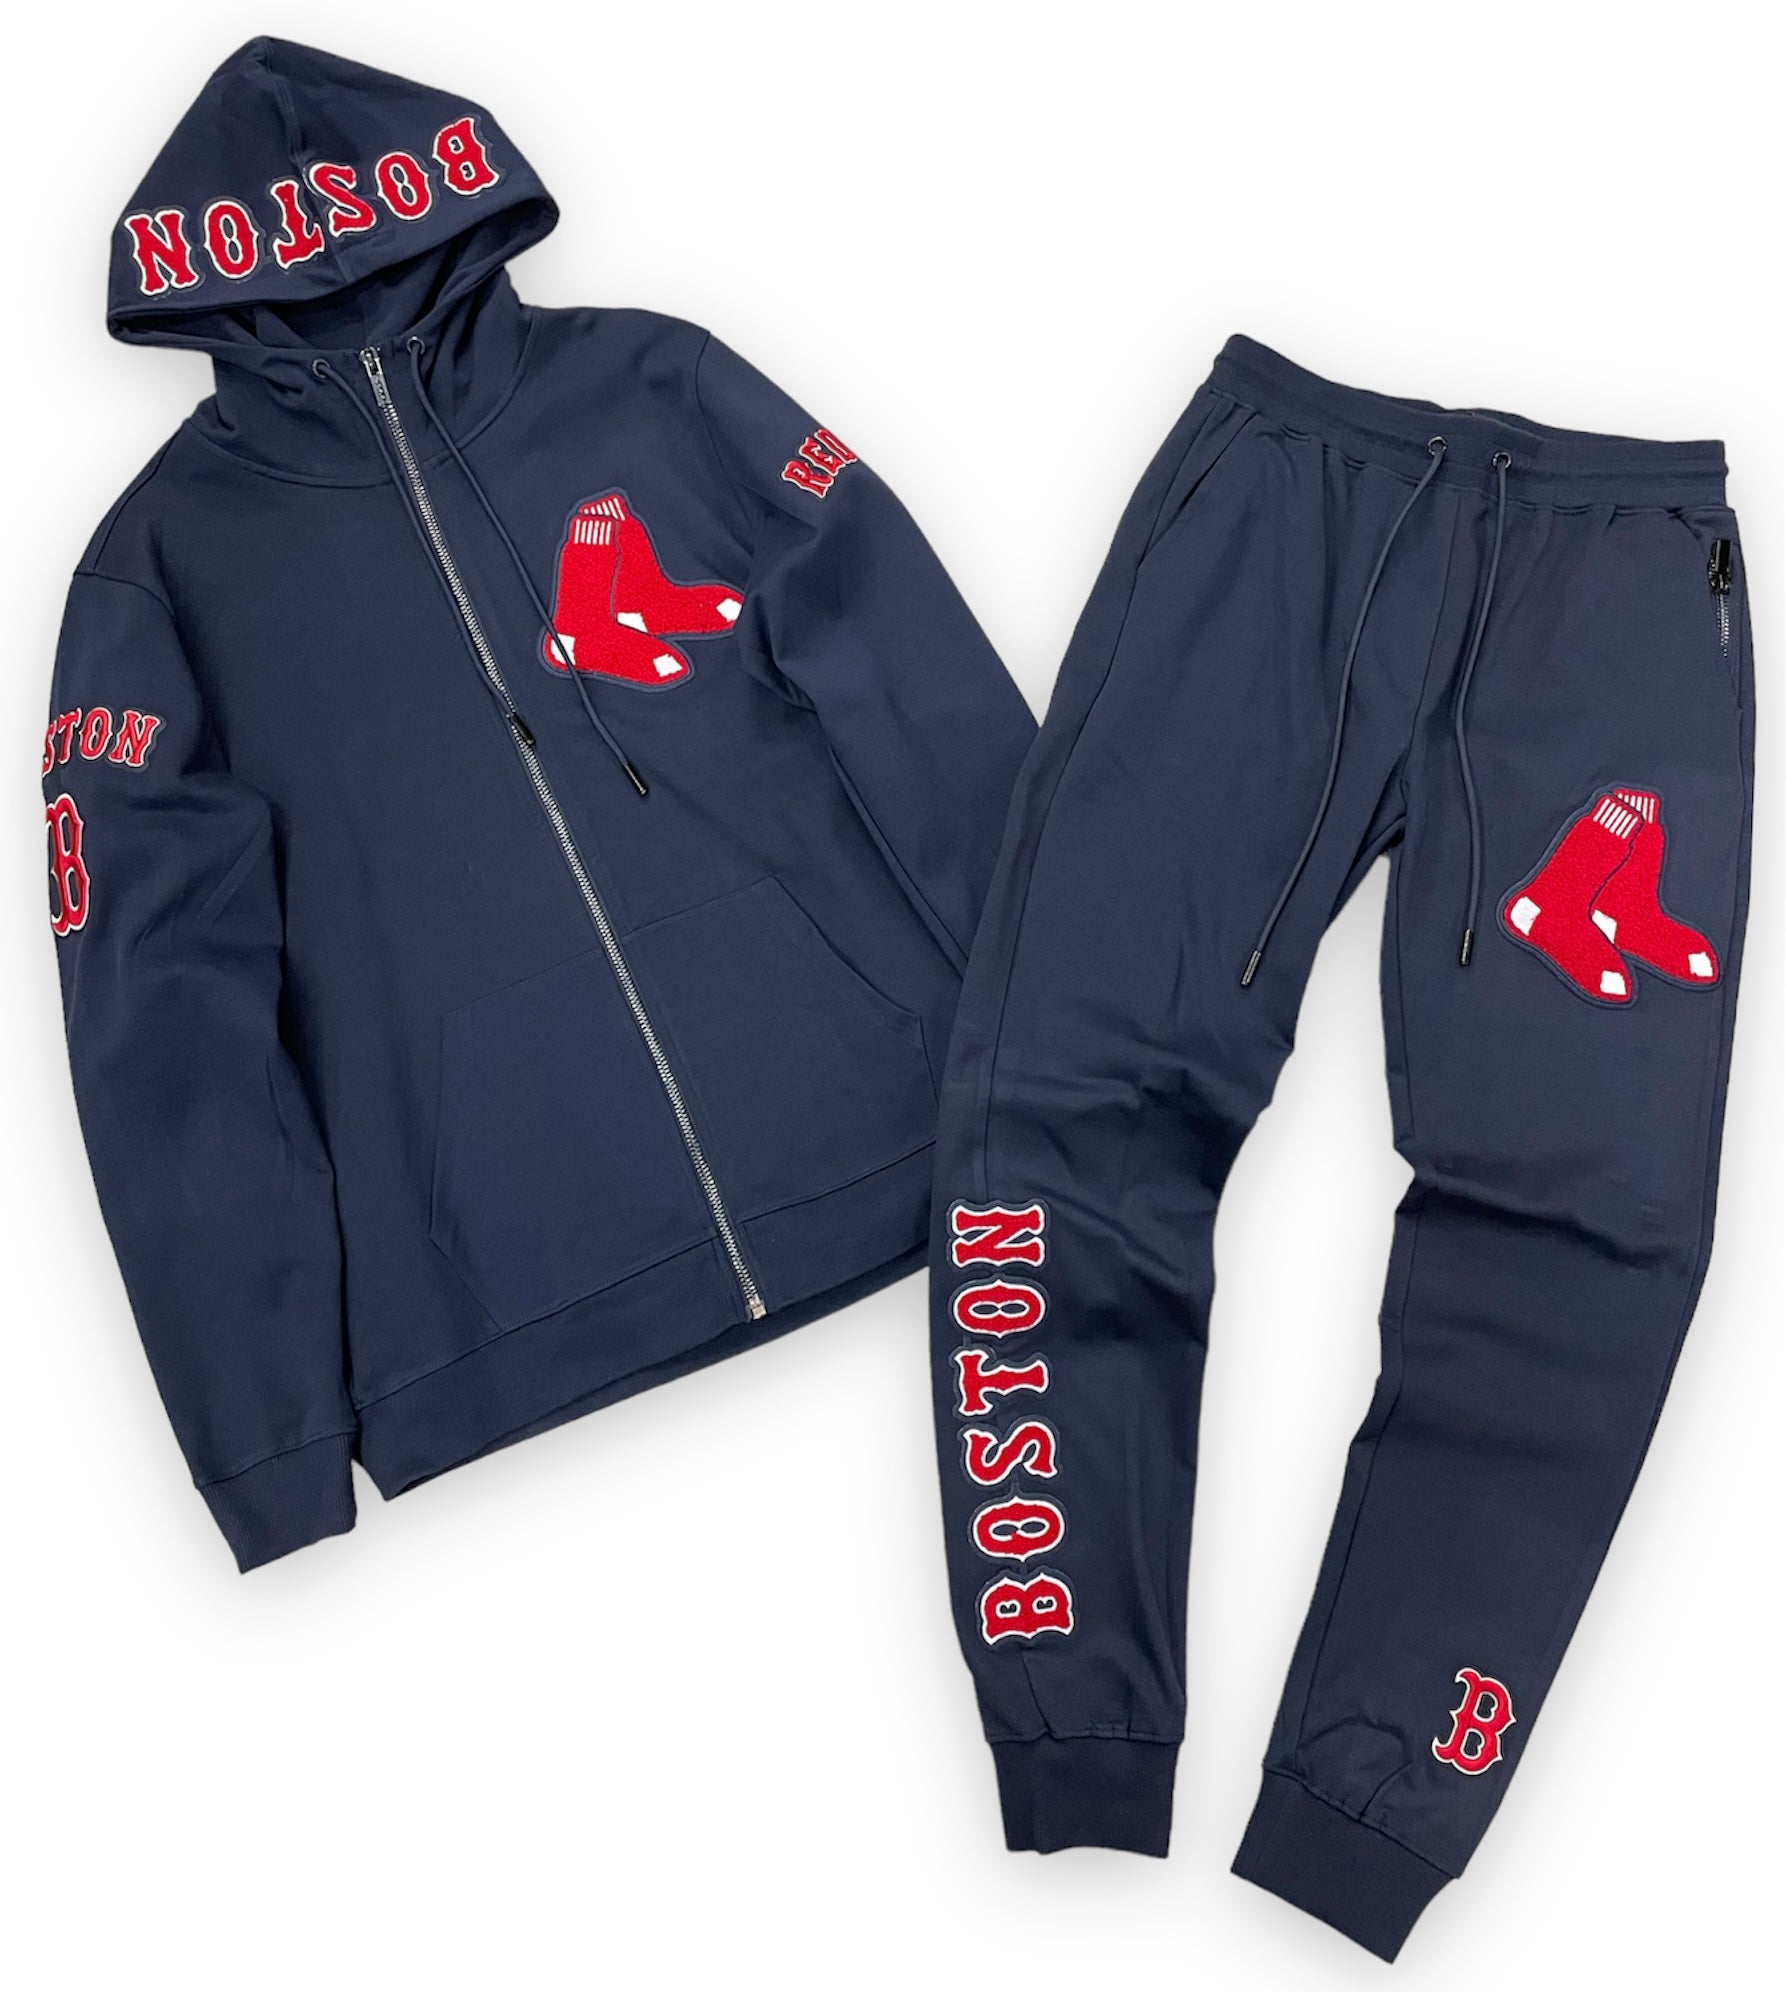 Pro Standard Boston Red Sox Men’s Outfit